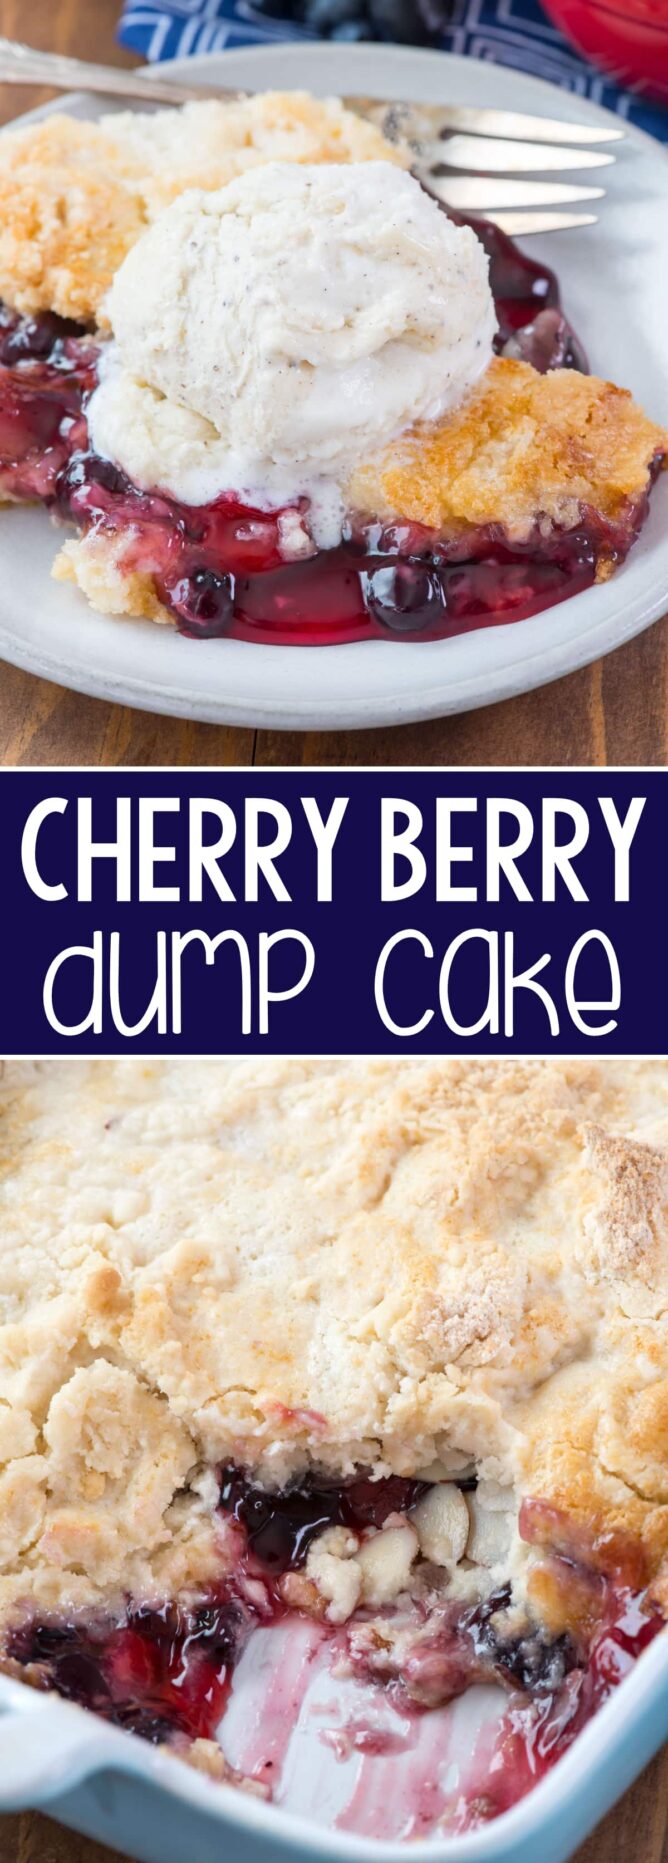 Collage of 2 Pictures of Cherry Berry Dump Cake